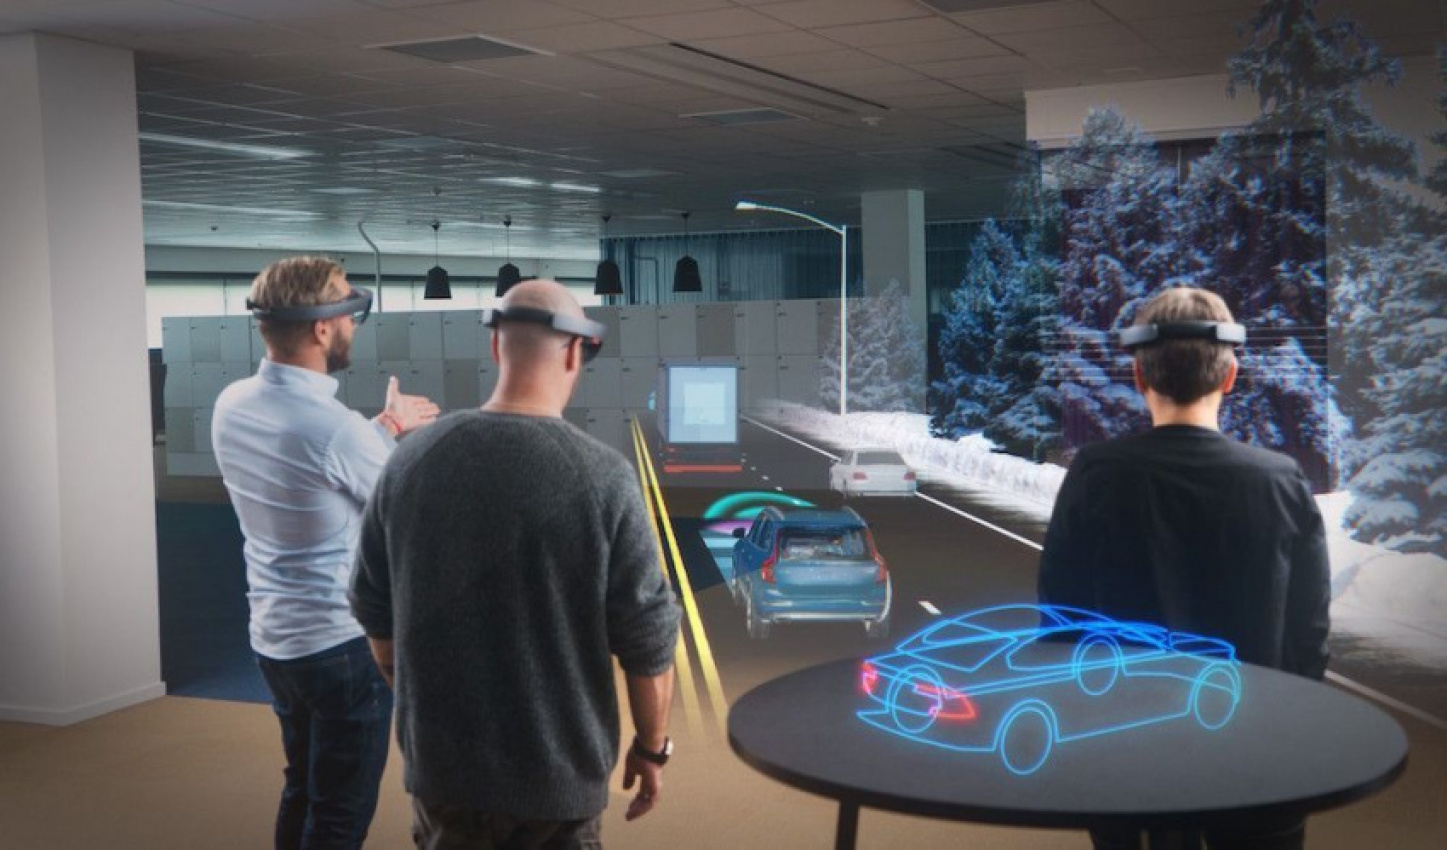 autos, cars, microsoft, reviews, volvo, augmented reality, hololens, insights, technology, virtual reality, visor, microsoft, volvo sees big dreams in microsoft’s insanely cool hololens virtual reality tech